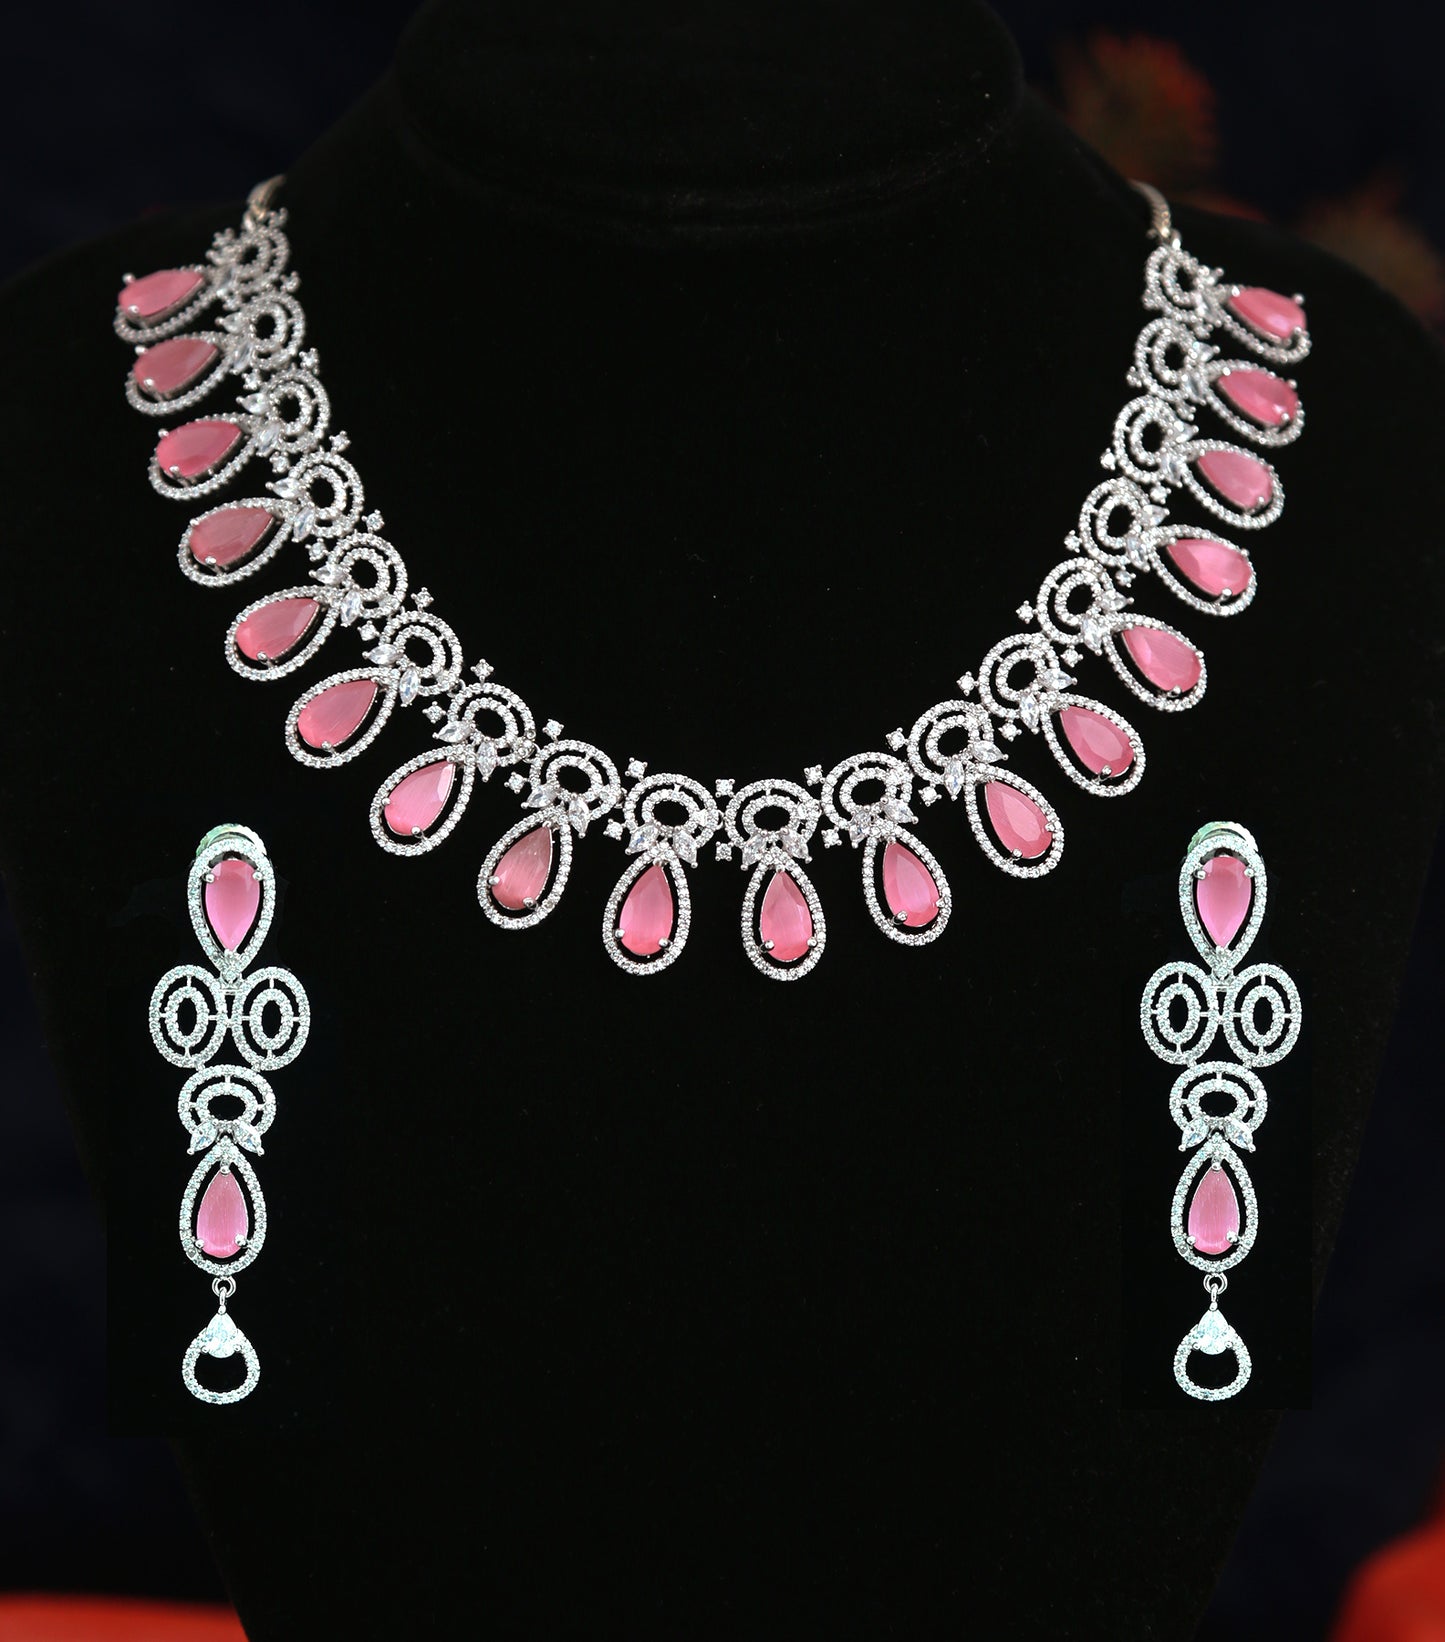 Pear shaped Pink Stone Silver American Diamond Necklace